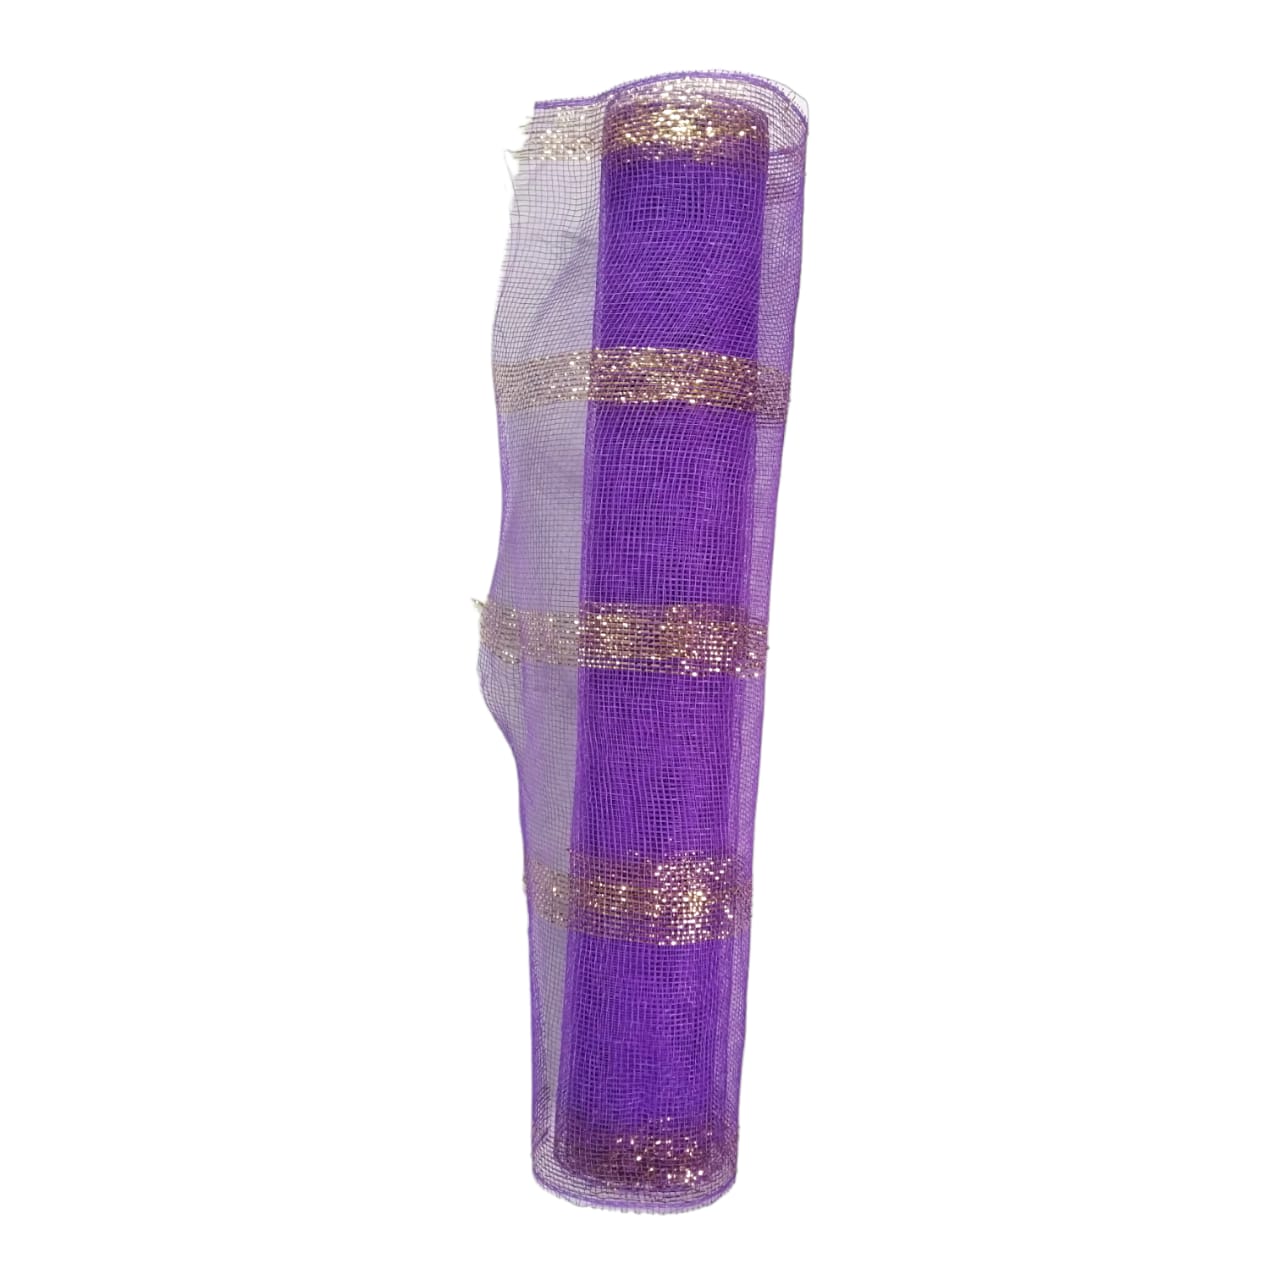 Craftdev Wrapping Paper& Material Purple Organza Fabric Roll - 45cmx4m, Contain 1 Unit